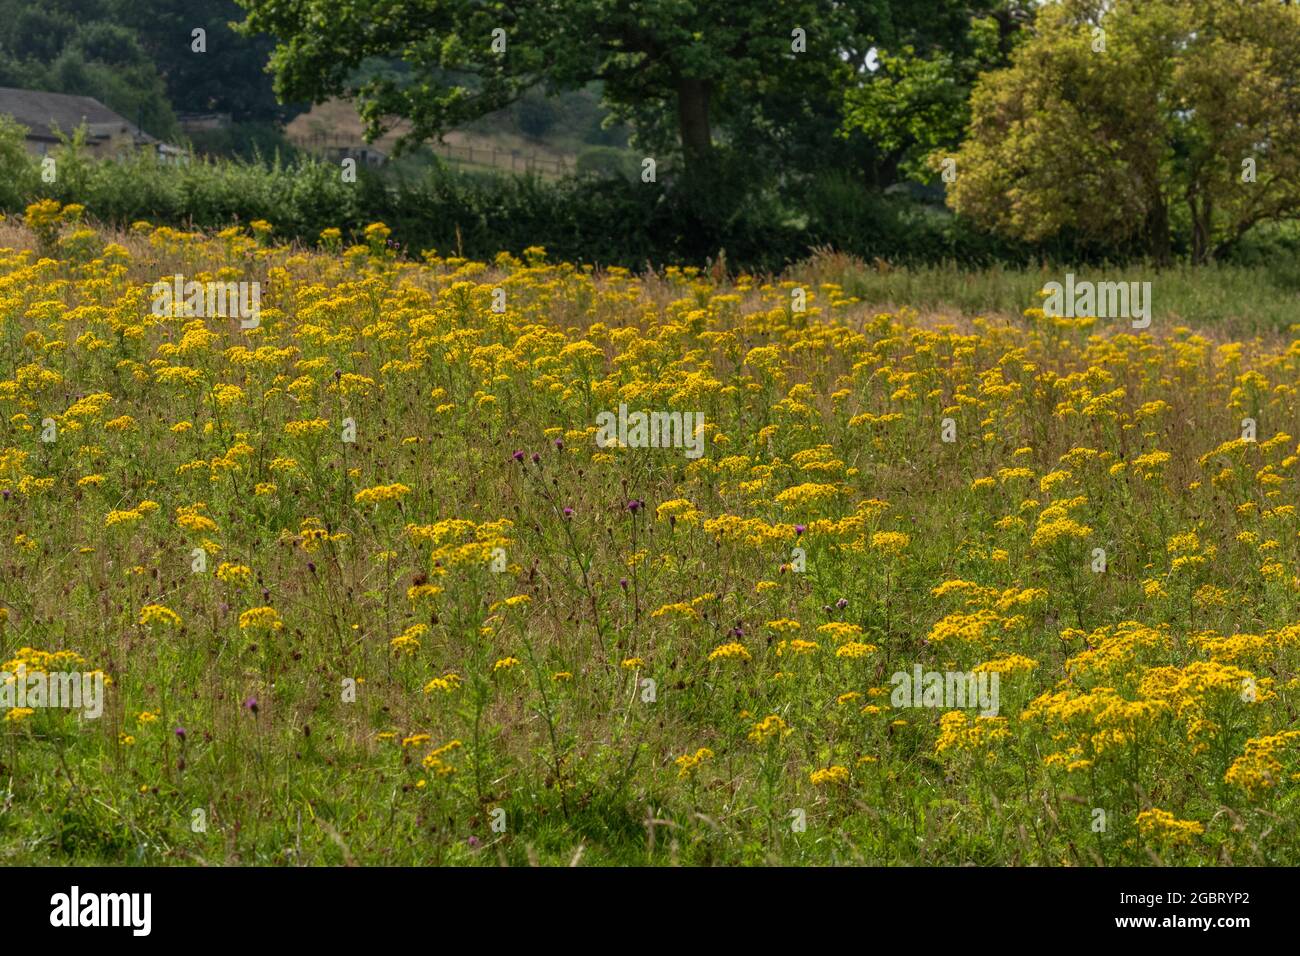 A field of common ragwort. (Senecio jacobaea). This plant is a useful source of food for insects but is poisonous to horses and cattle. Stock Photo